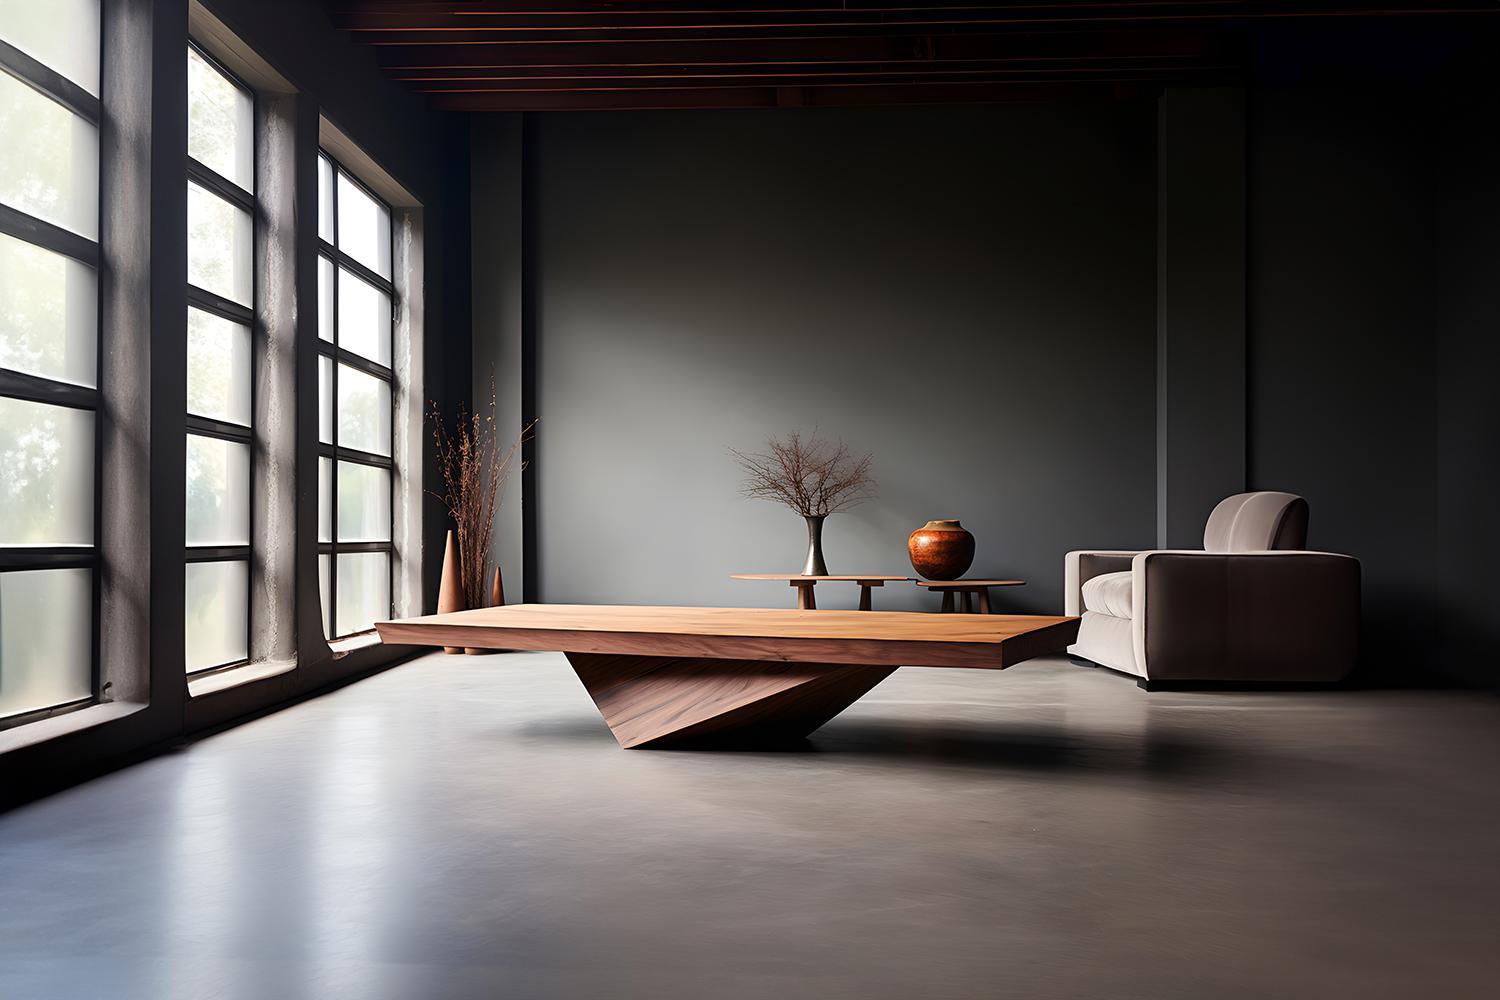 Rectangular Coffee Table Made of Solid Wood, Center Table Solace S23 by Joel Escalona


The Solace table series, designed by Joel Escalona, is a furniture collection that exudes balance and presence, thanks to its sensuous, dense, and irregular